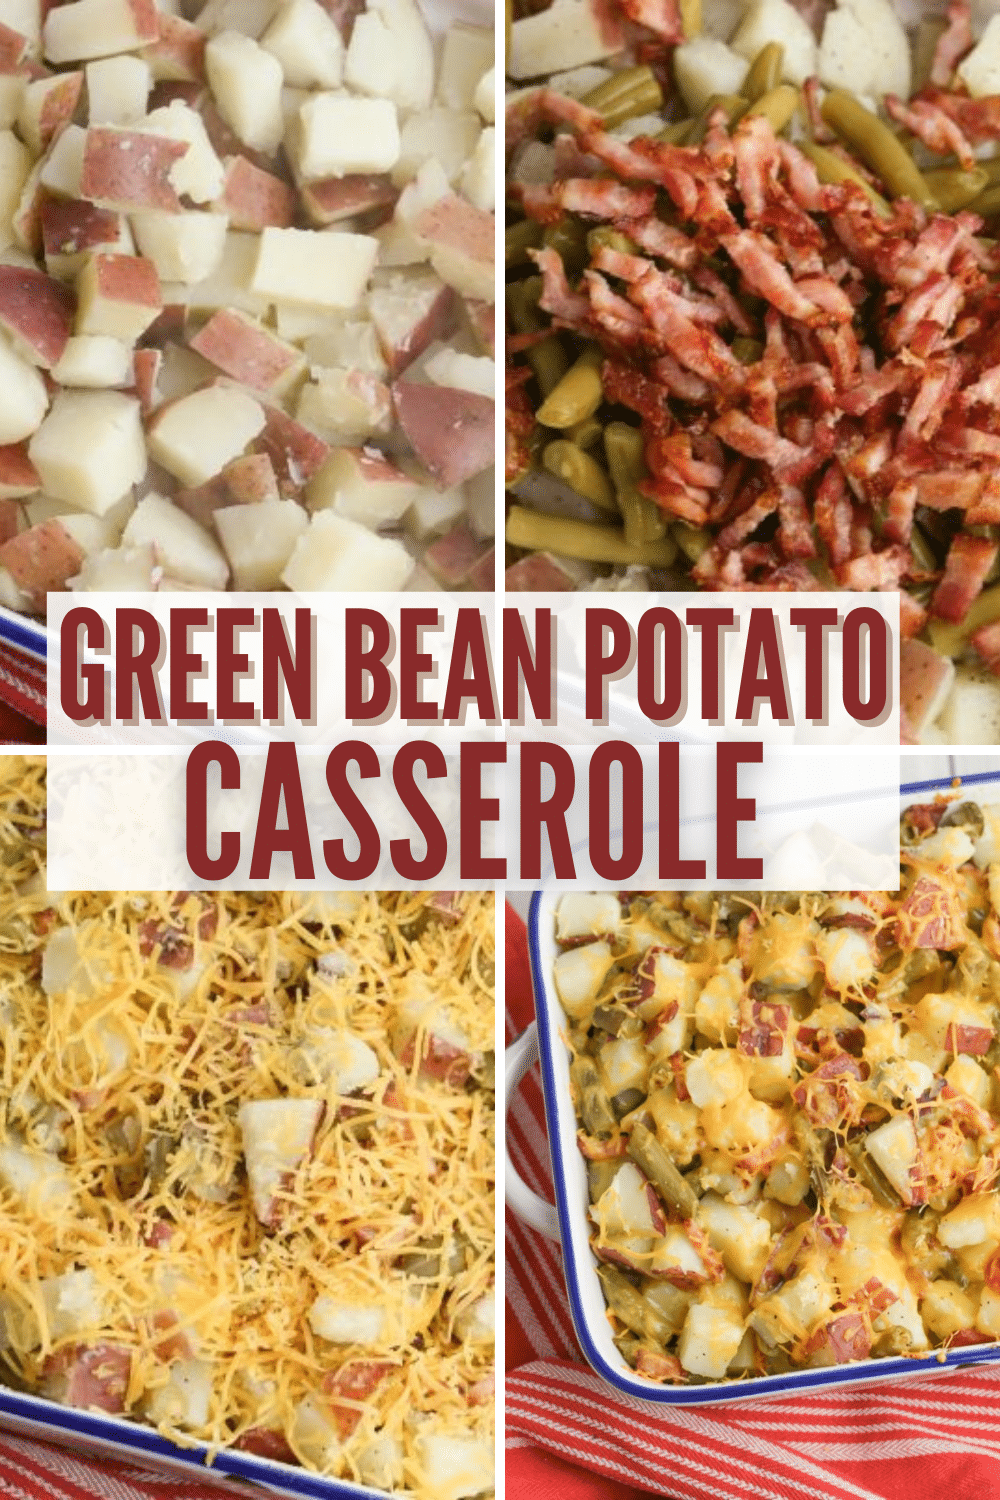 This green bean potato casserole can be a main dish or a side dish. Either way your family will love the flavors in this easy casserole recipe. #greenbeans #casseroles #greenbeancasserole via @wondermomwannab